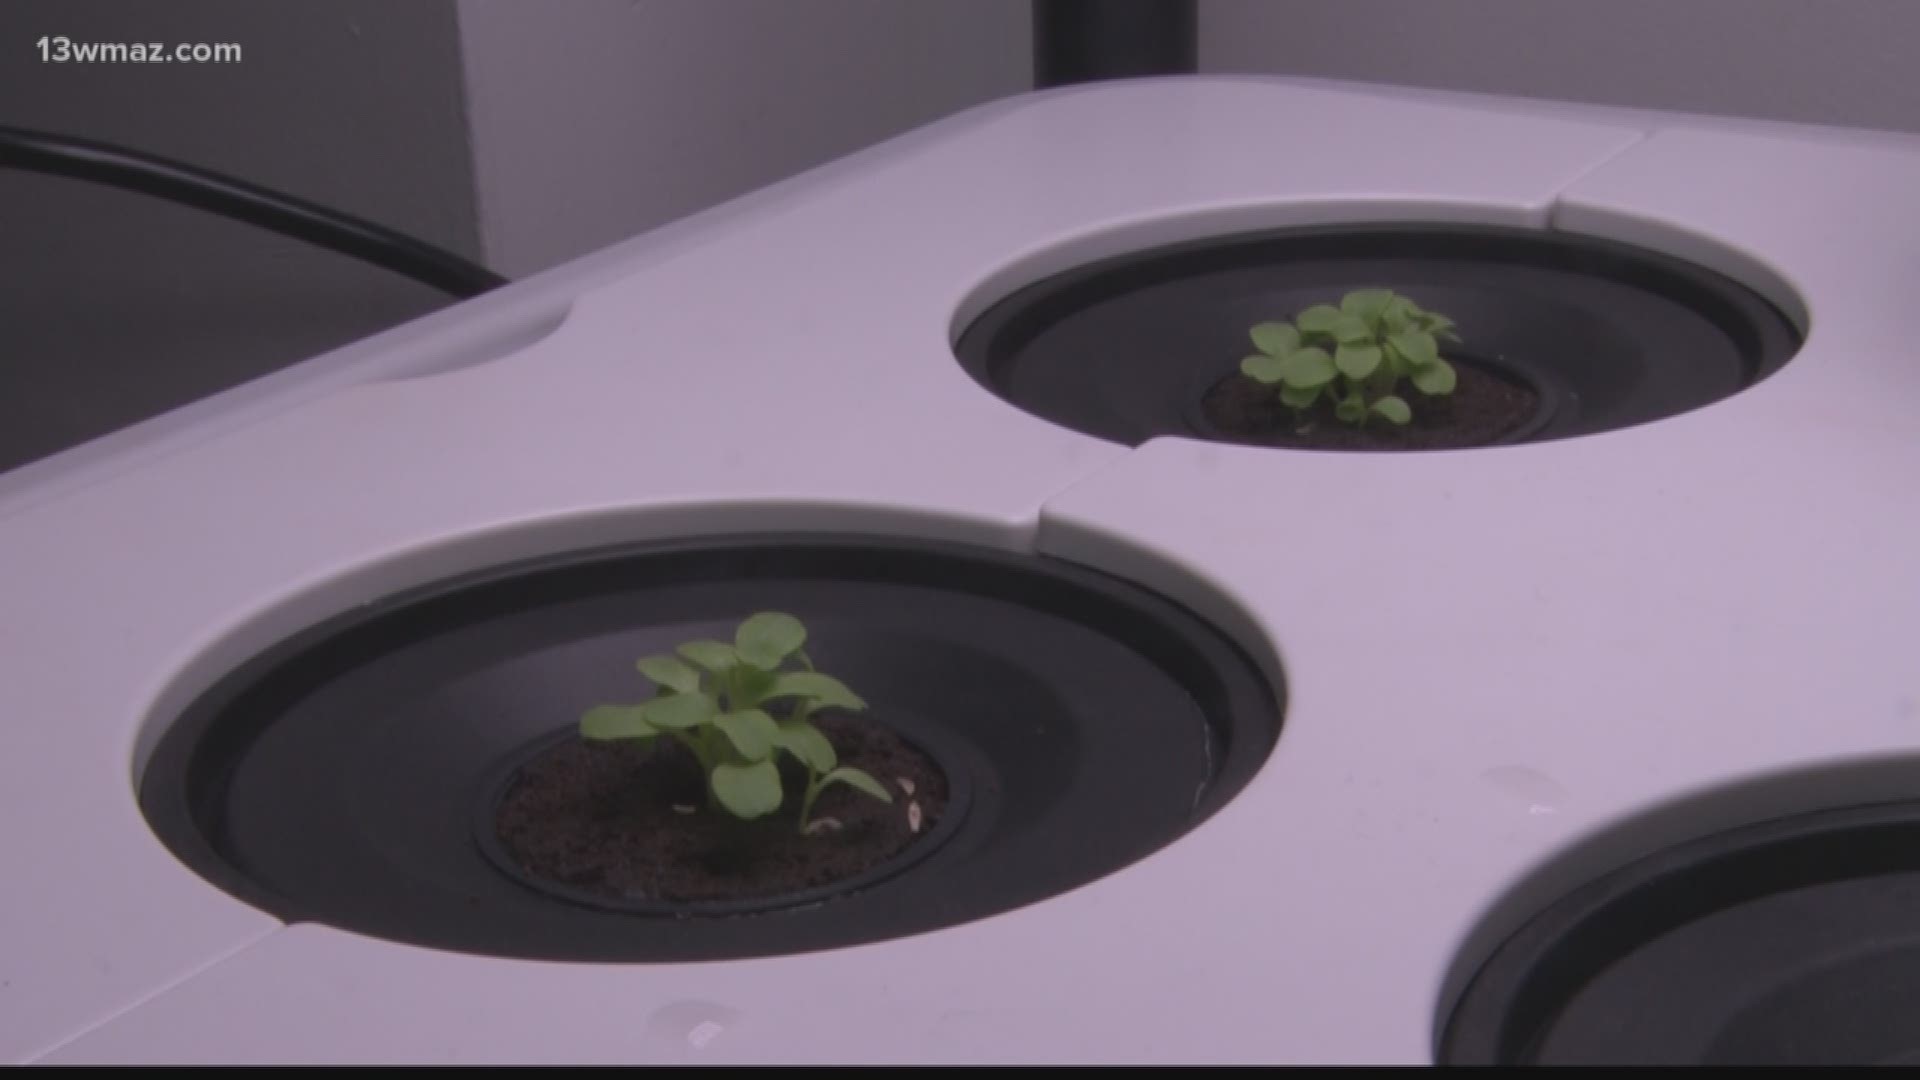 SOAR Academy students are learning about a new farming technology that allows students to plant vegetables indoors.